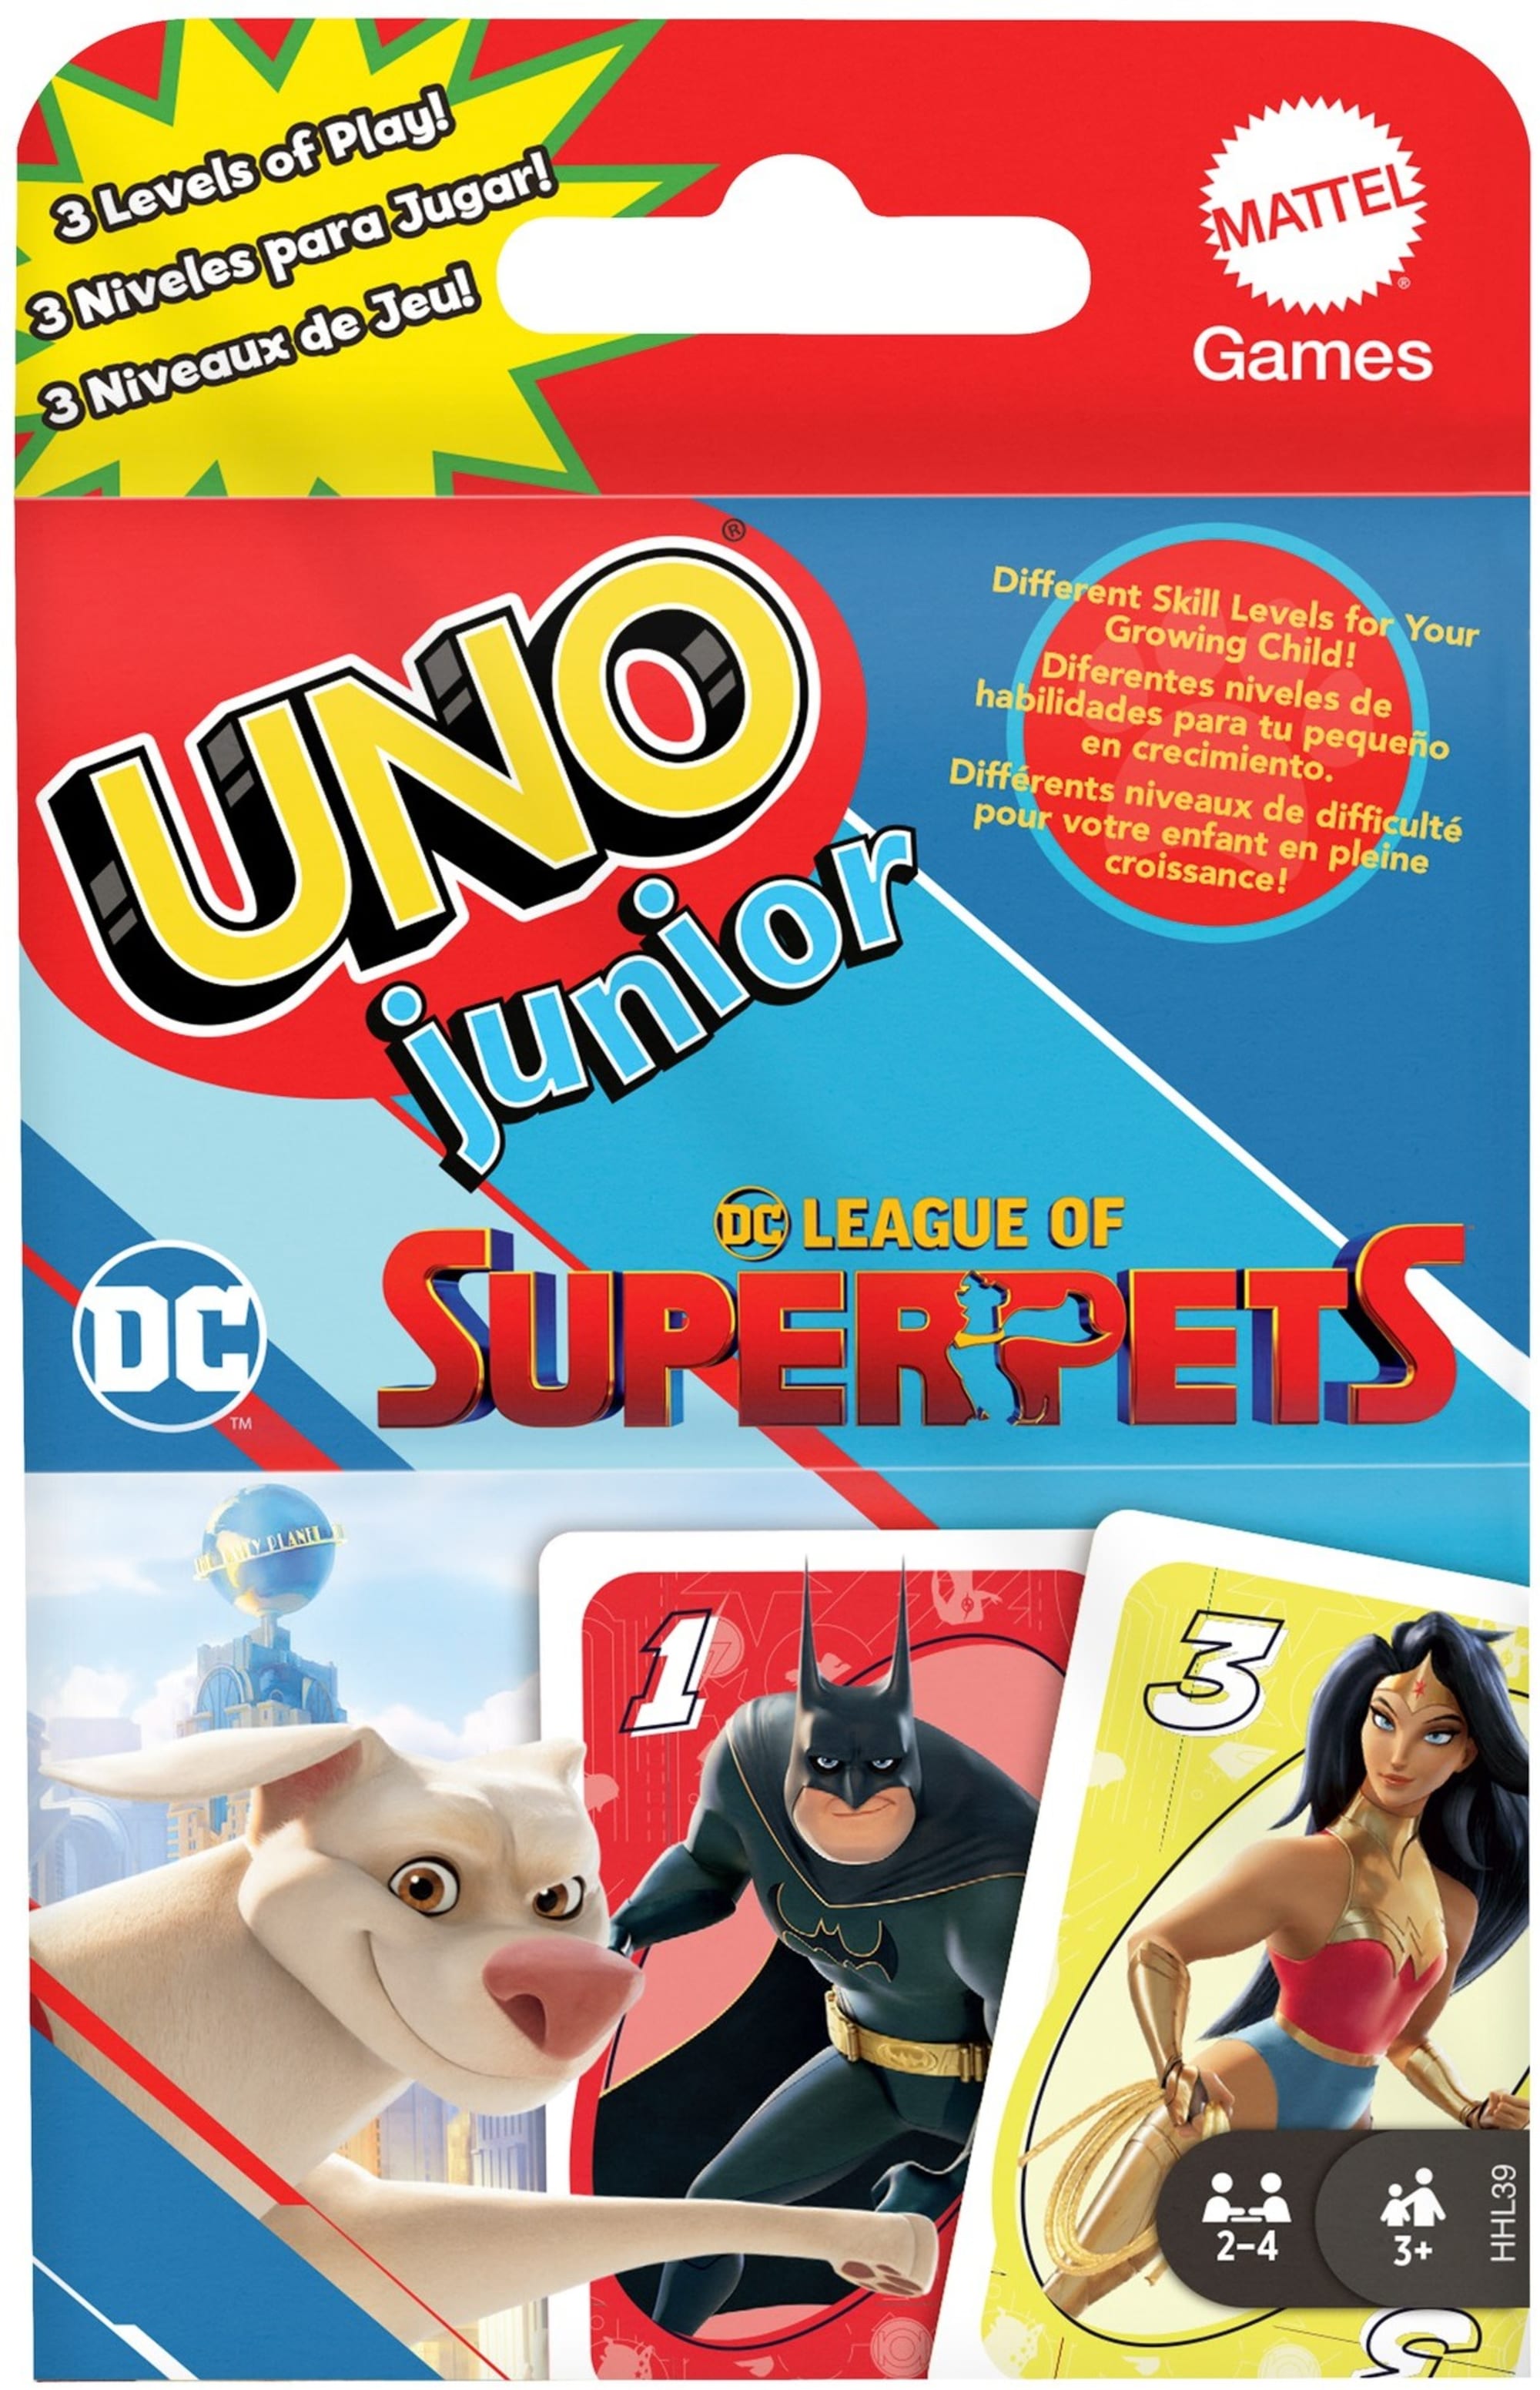 UNO Junior Rules And Cards - Learning Board Games